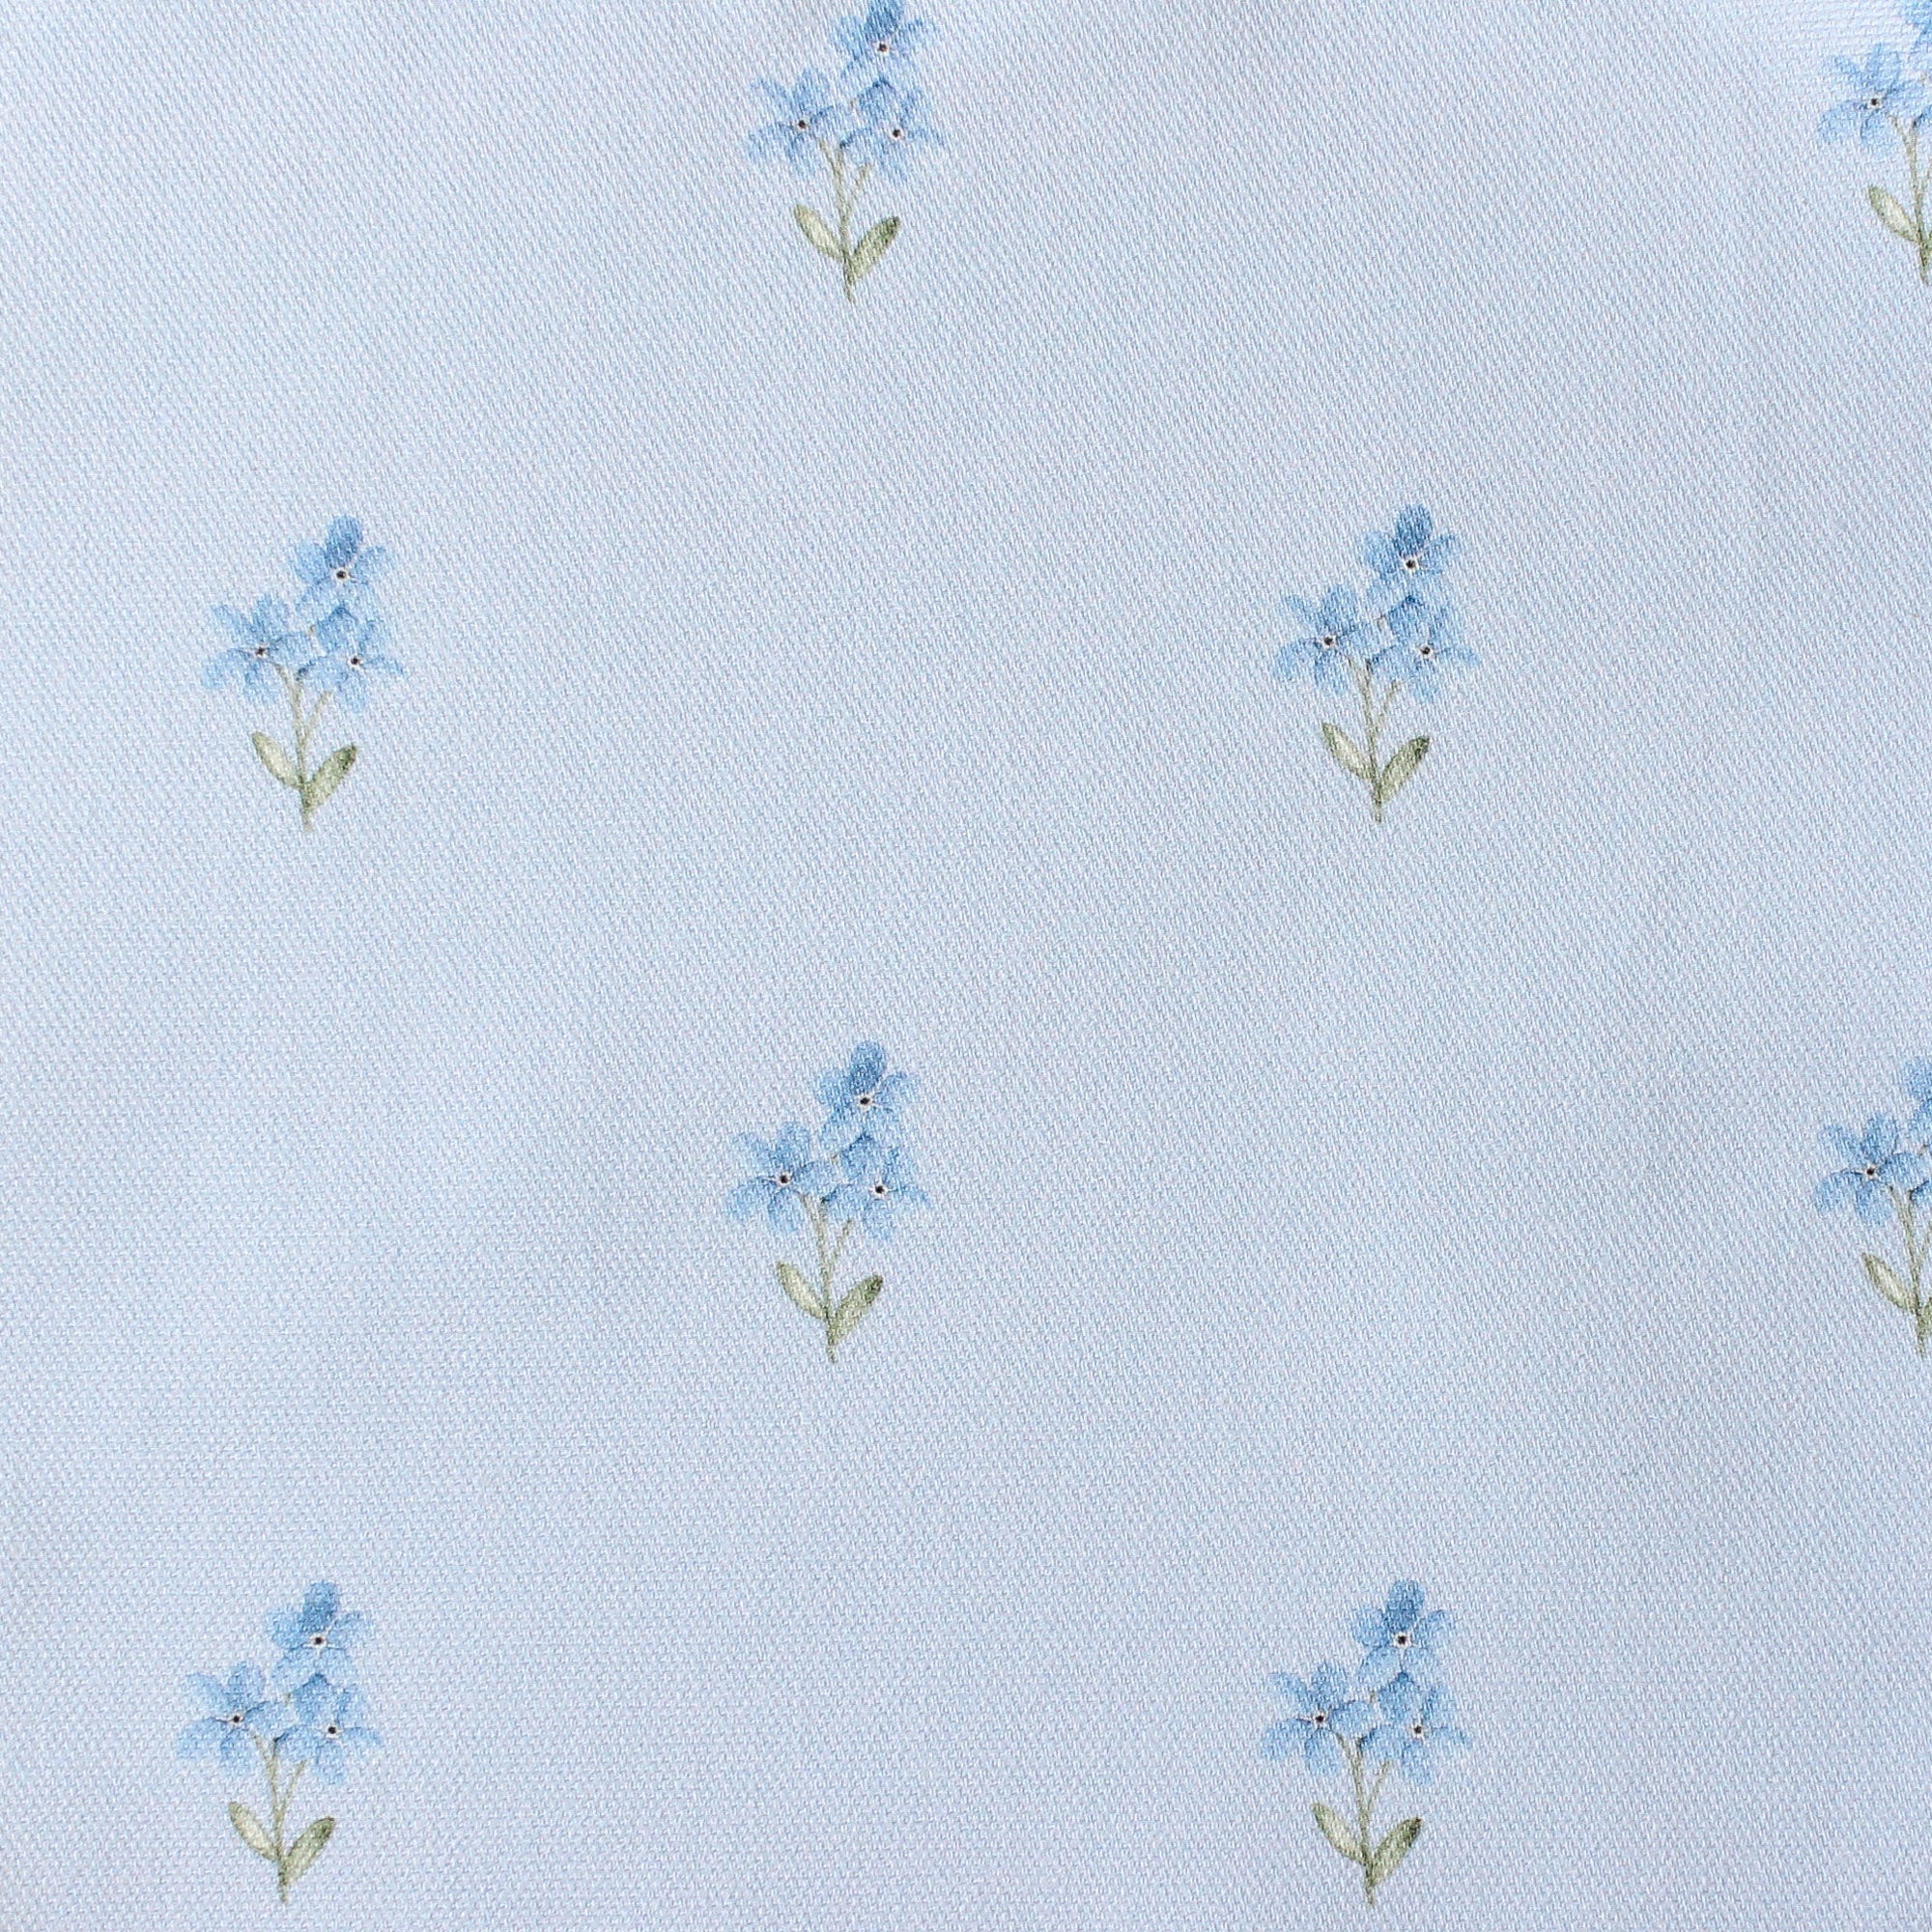 Violet PUL Fabric – Forget Me Not Fabric